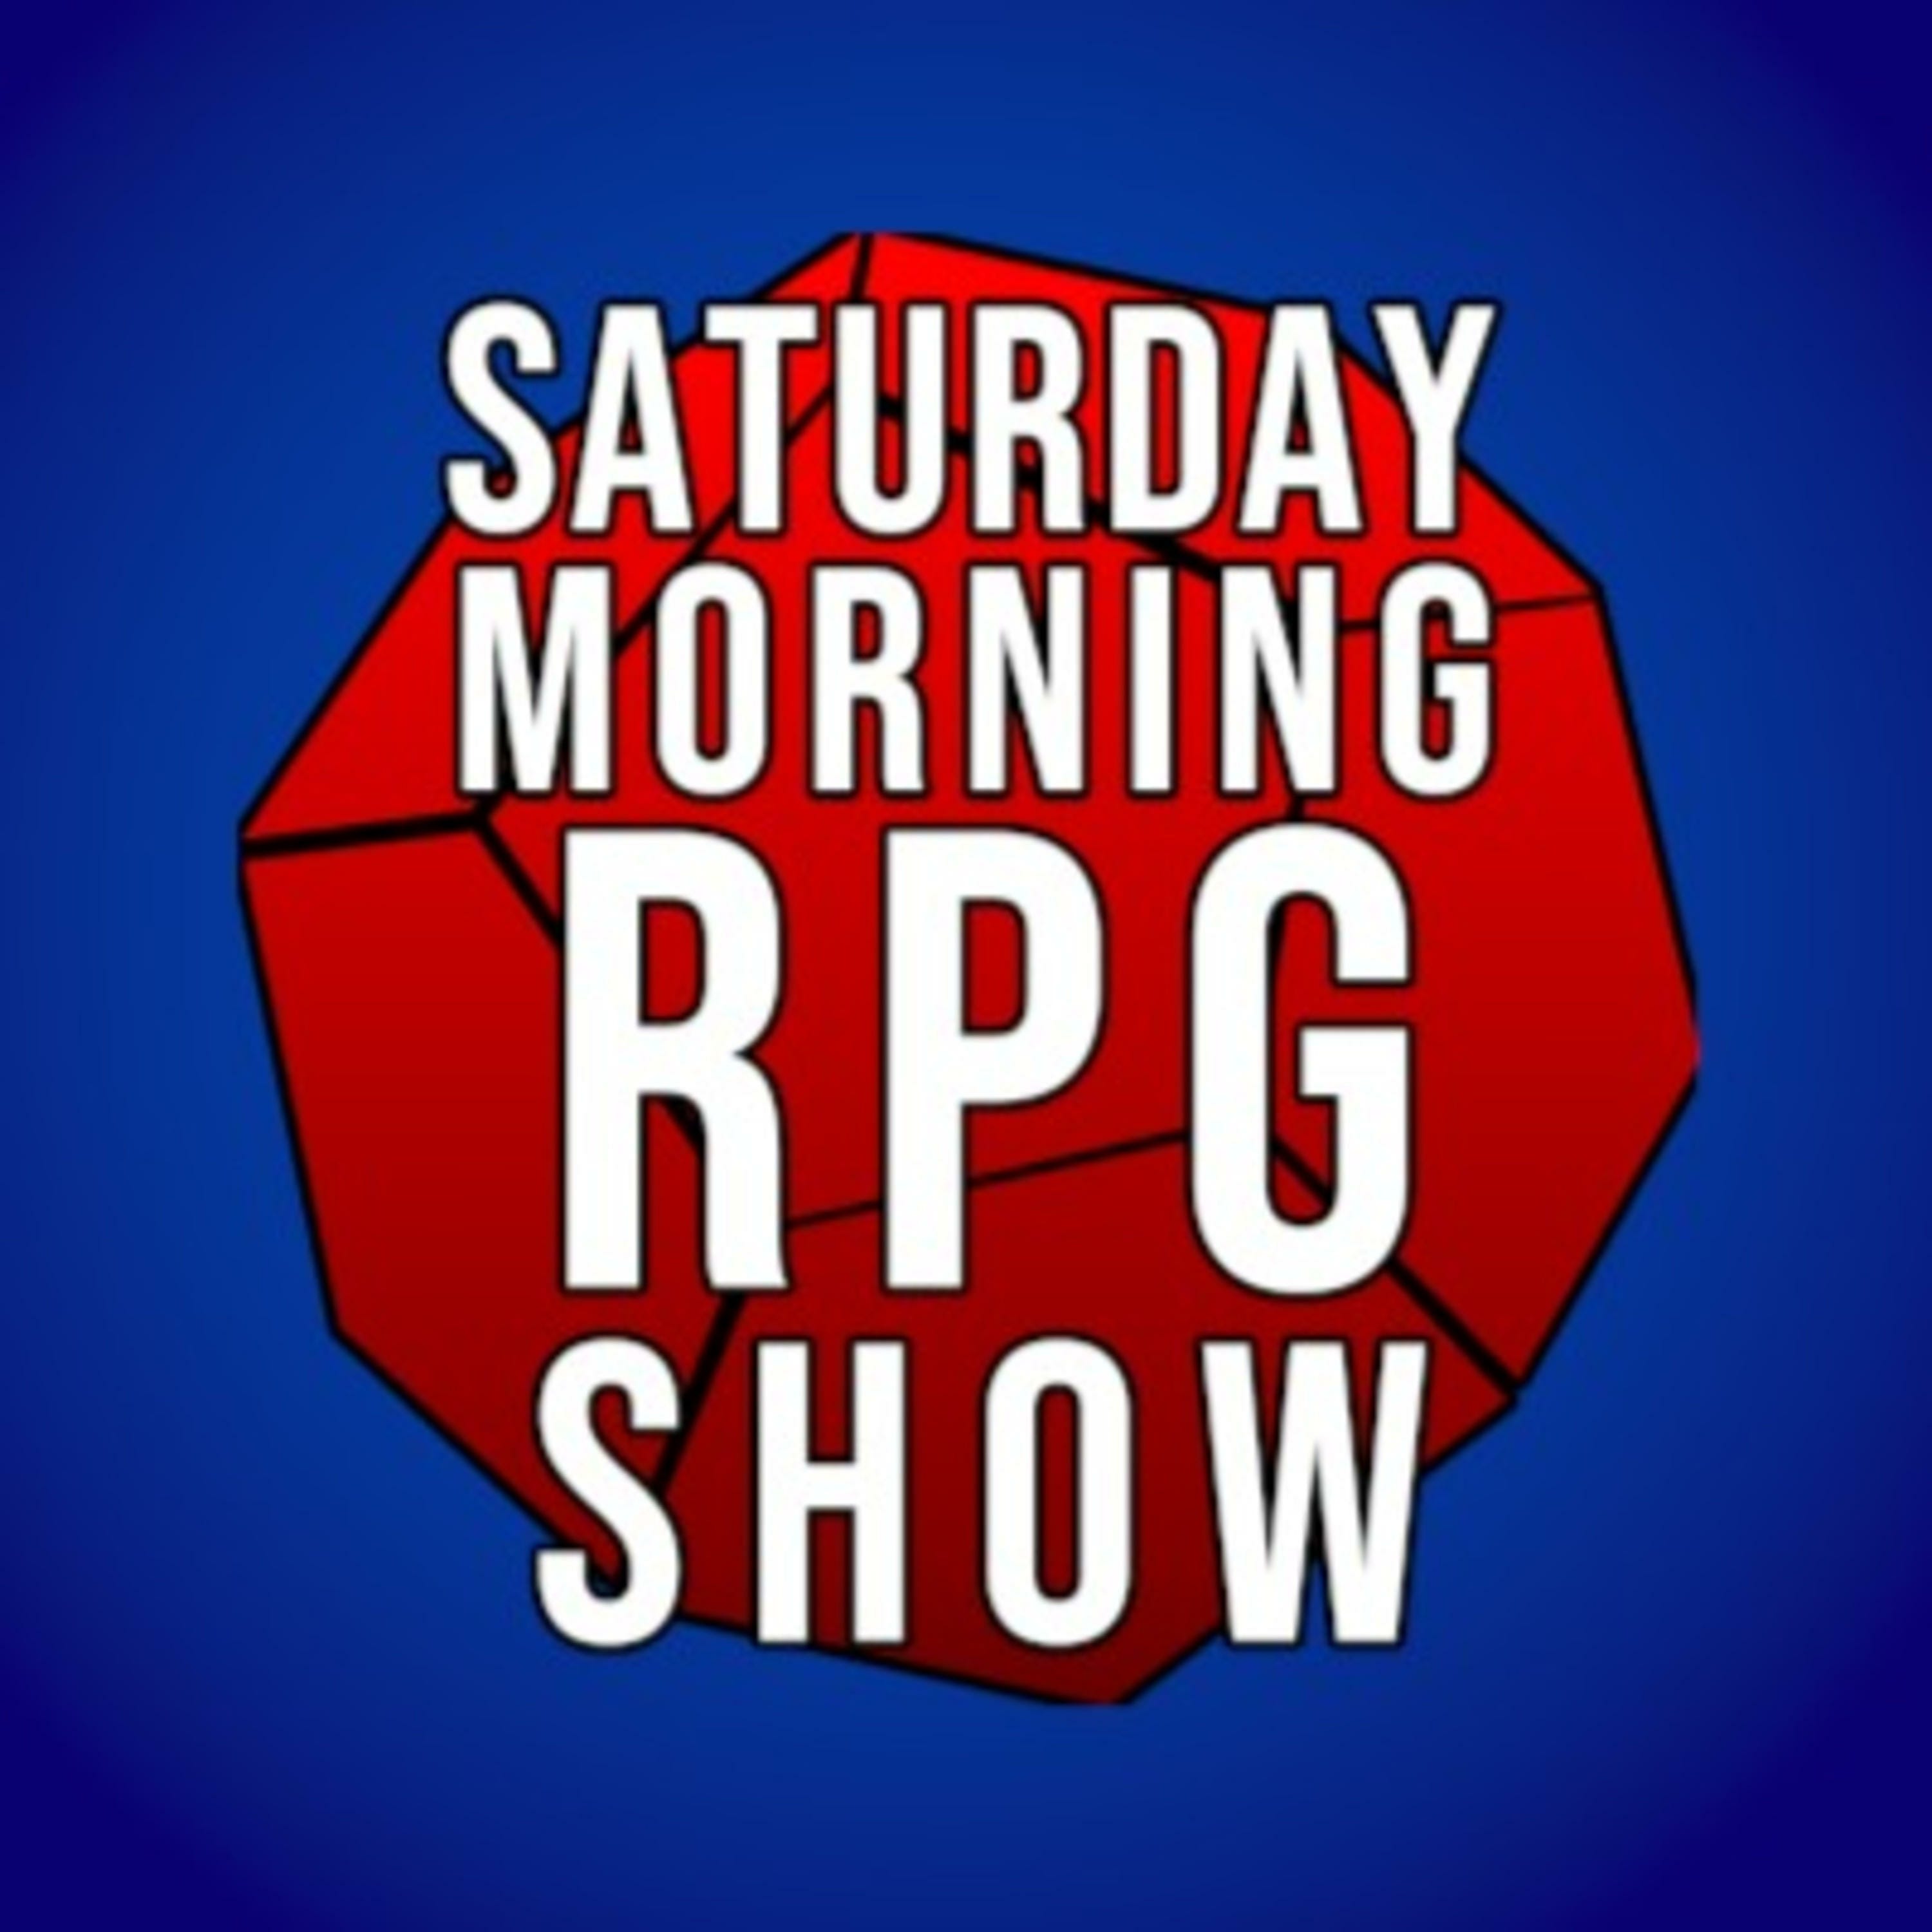 Ep 26 - SMDnDShow - Mutli Level Parties and Metagaming